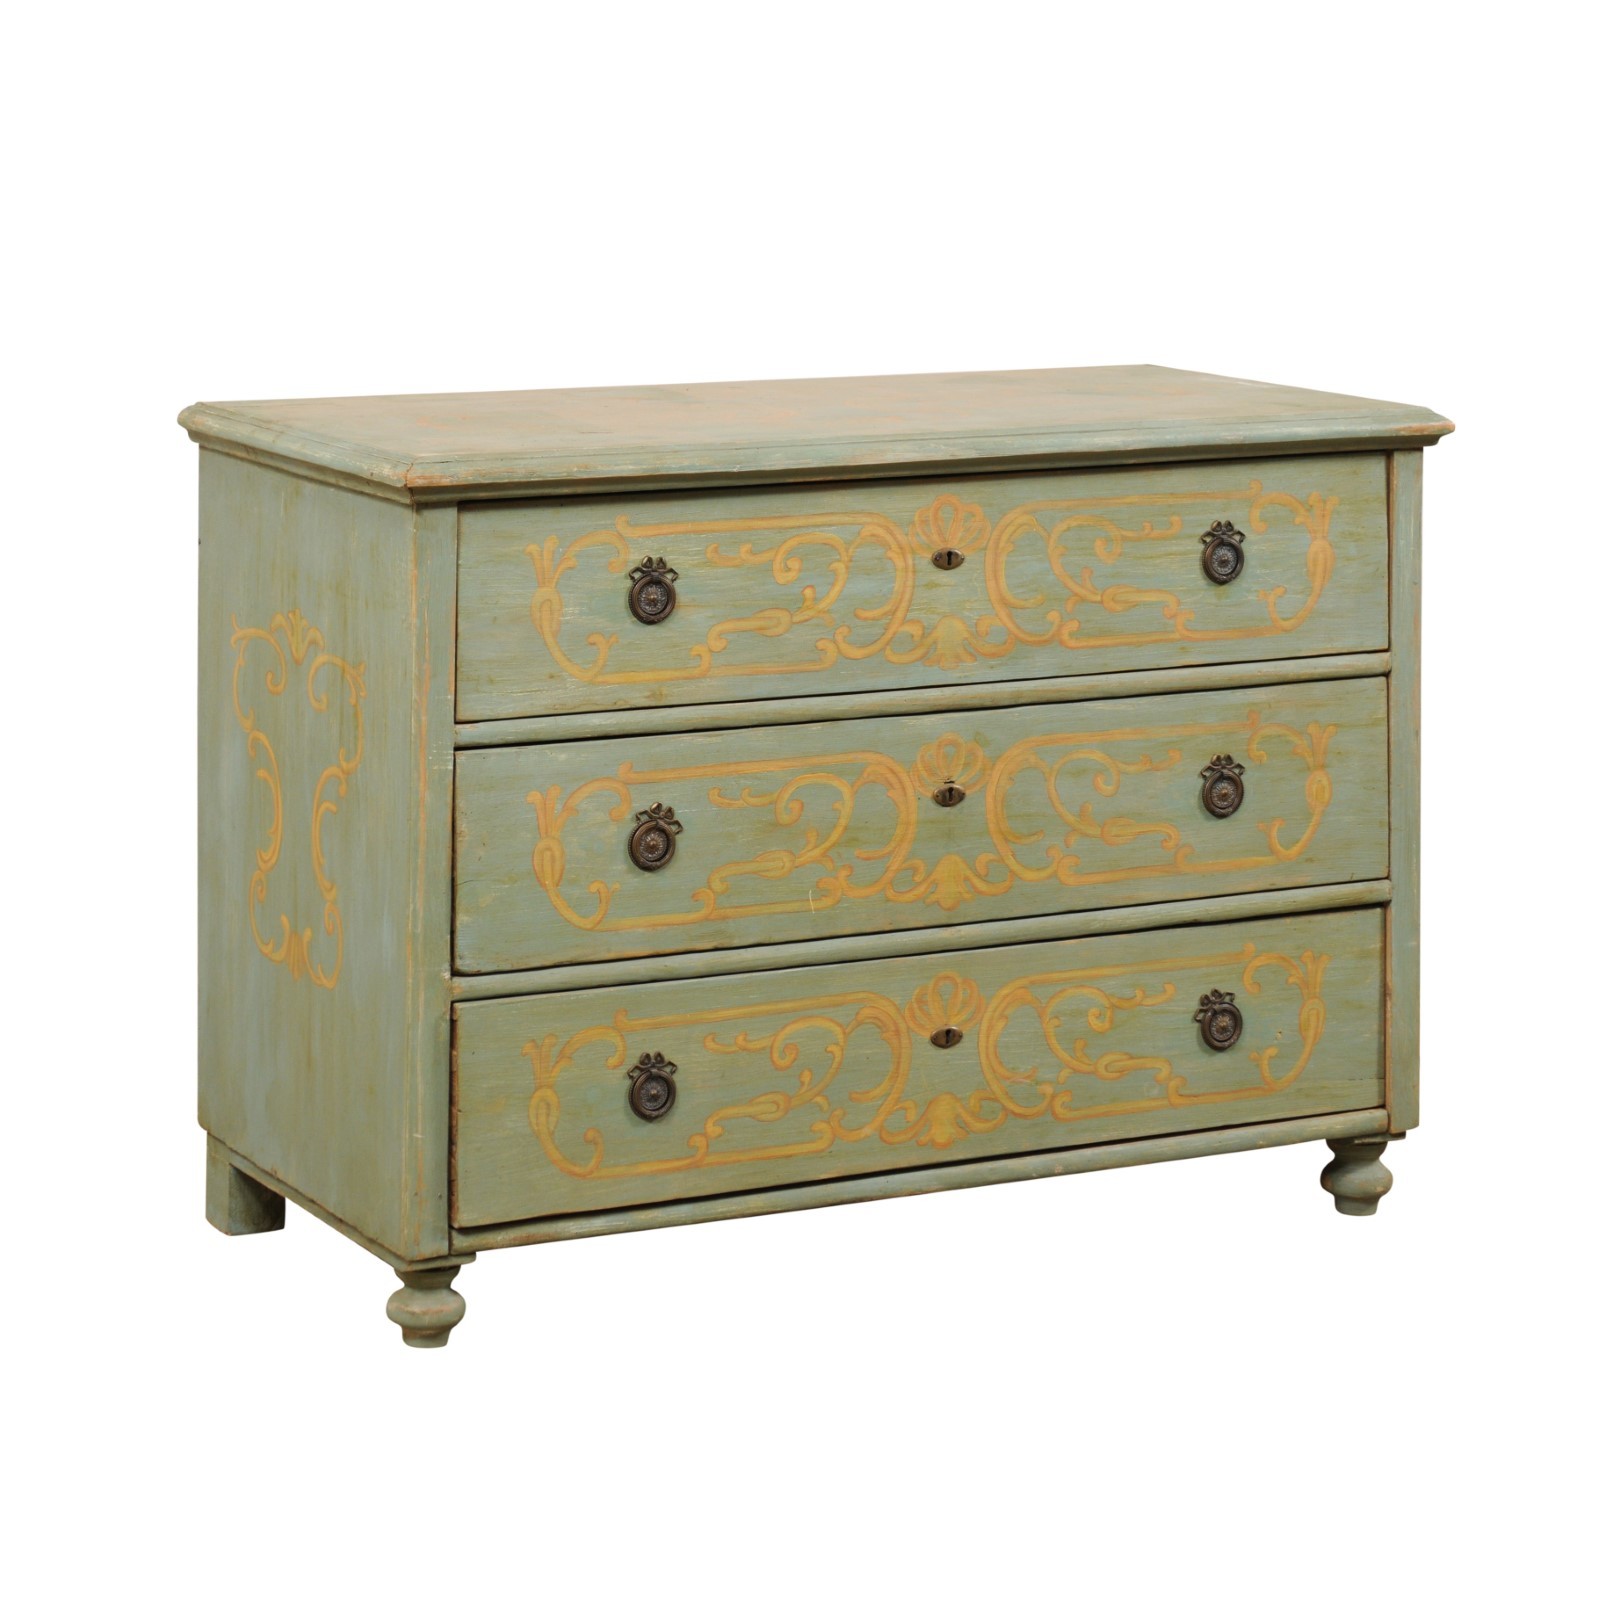 Antique European Hand-Painted Wood Chest